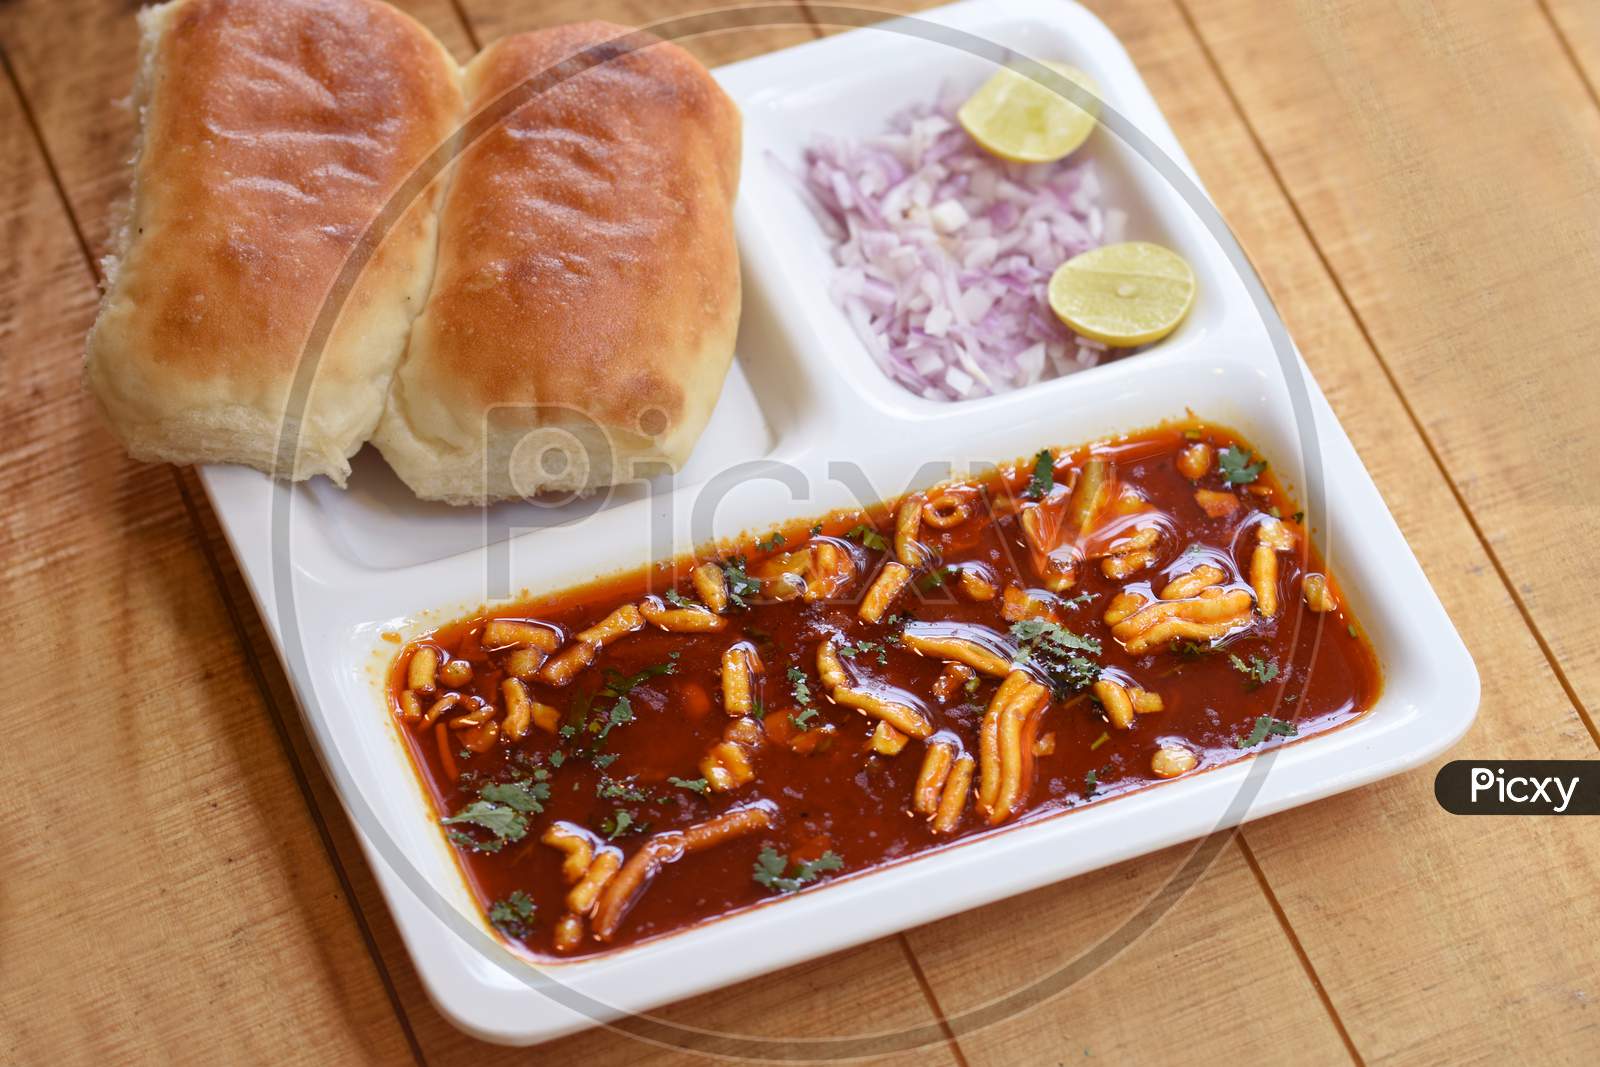 Indian Delicious "Misal Pav" With Onion And Coriander Spread On Top Of Curry Wheat Bread